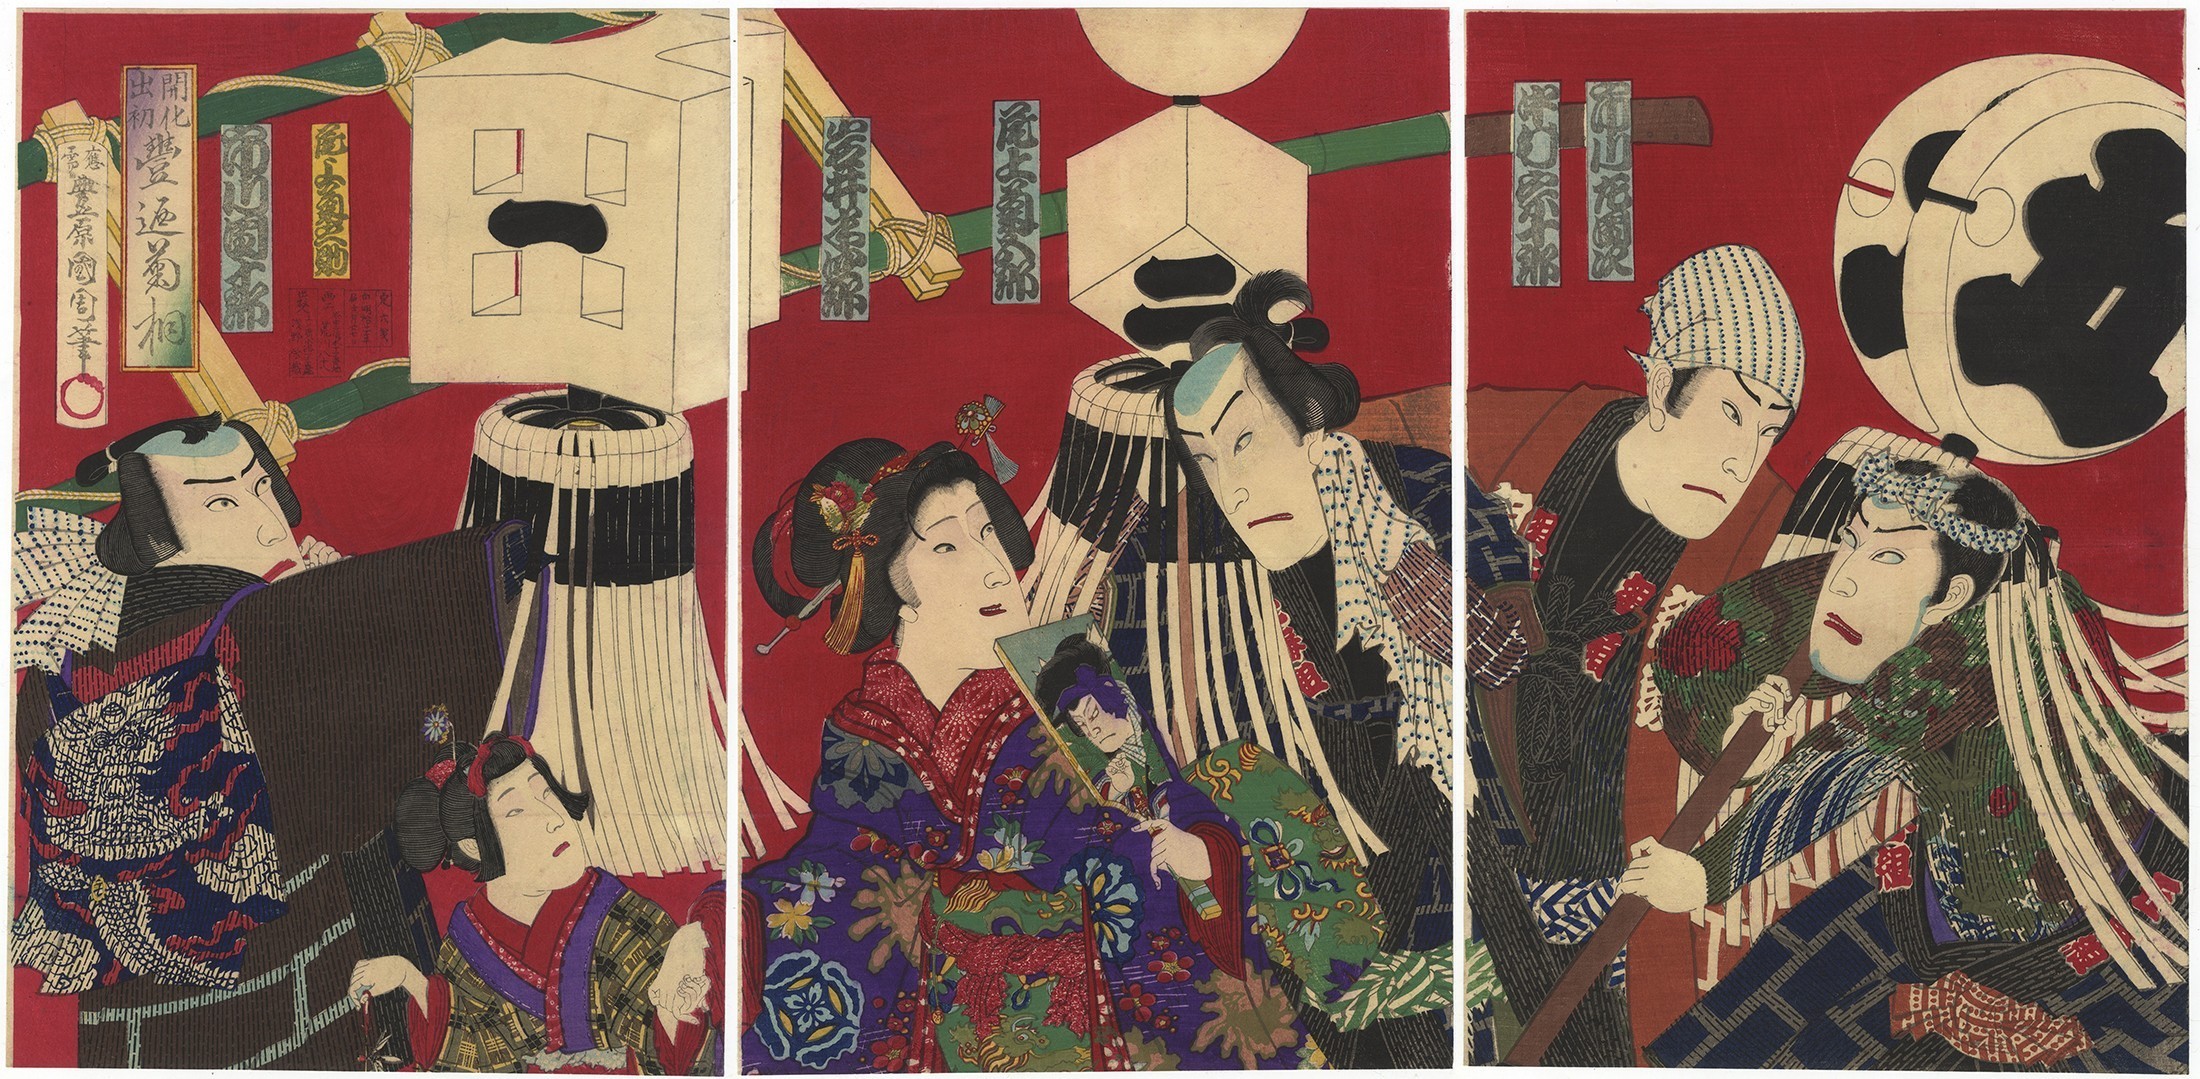 Firemen and Tattoos in Japanese Woodblock Prints